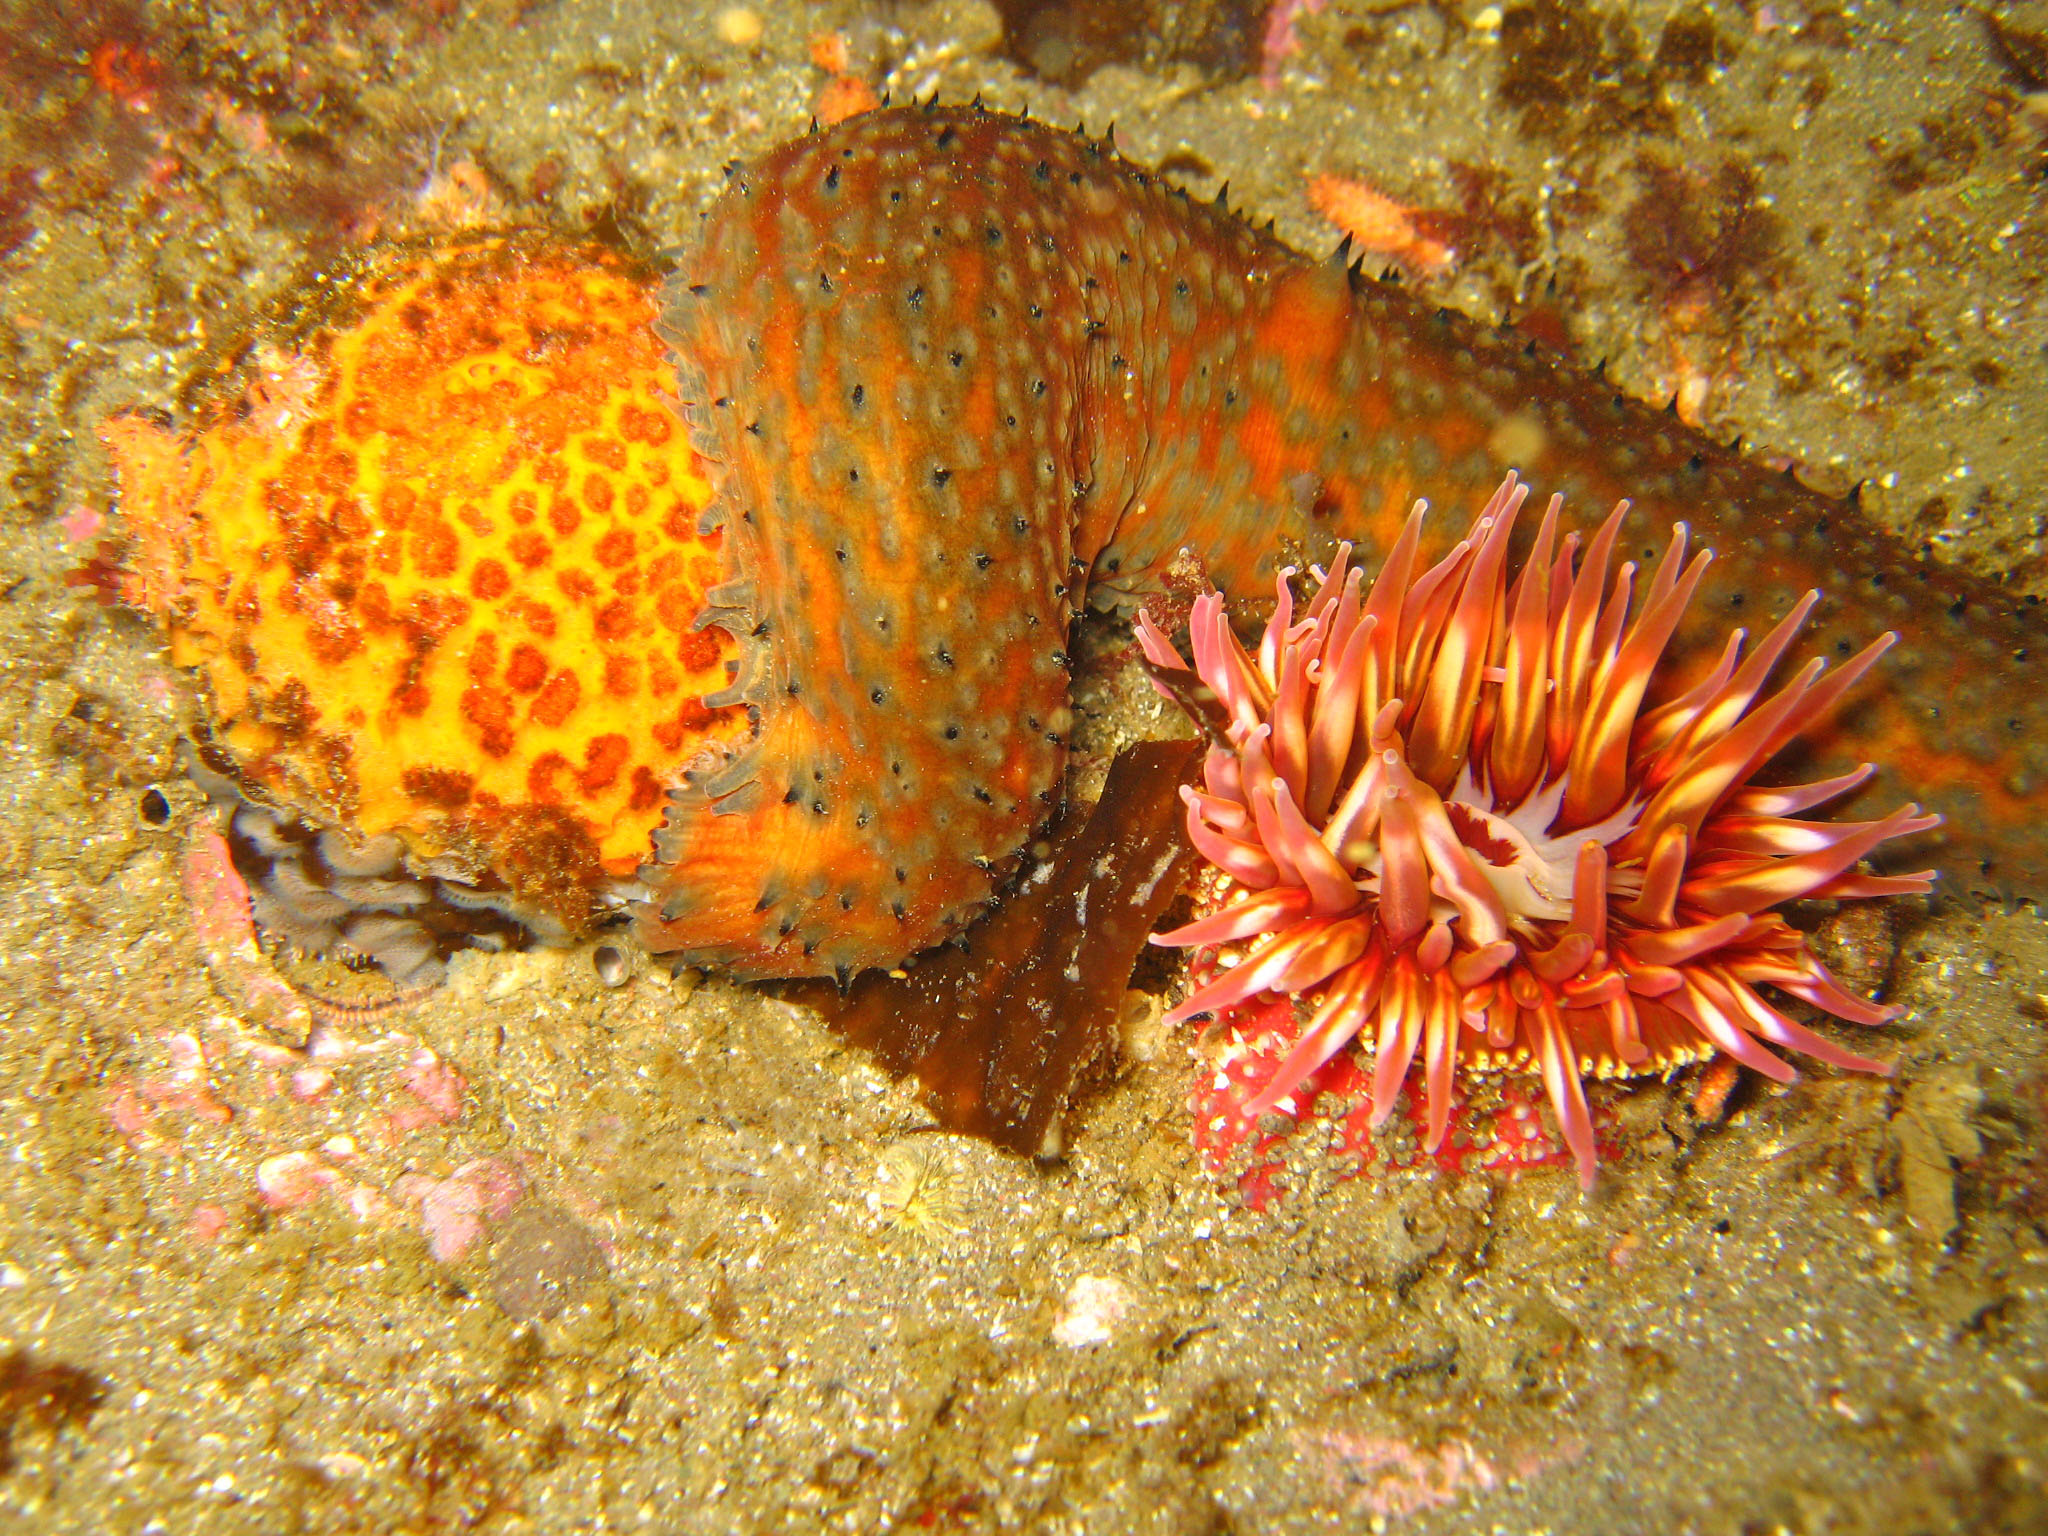 Painted Urticina and a California Sea Cucumber eating an Orange Puffball Sp